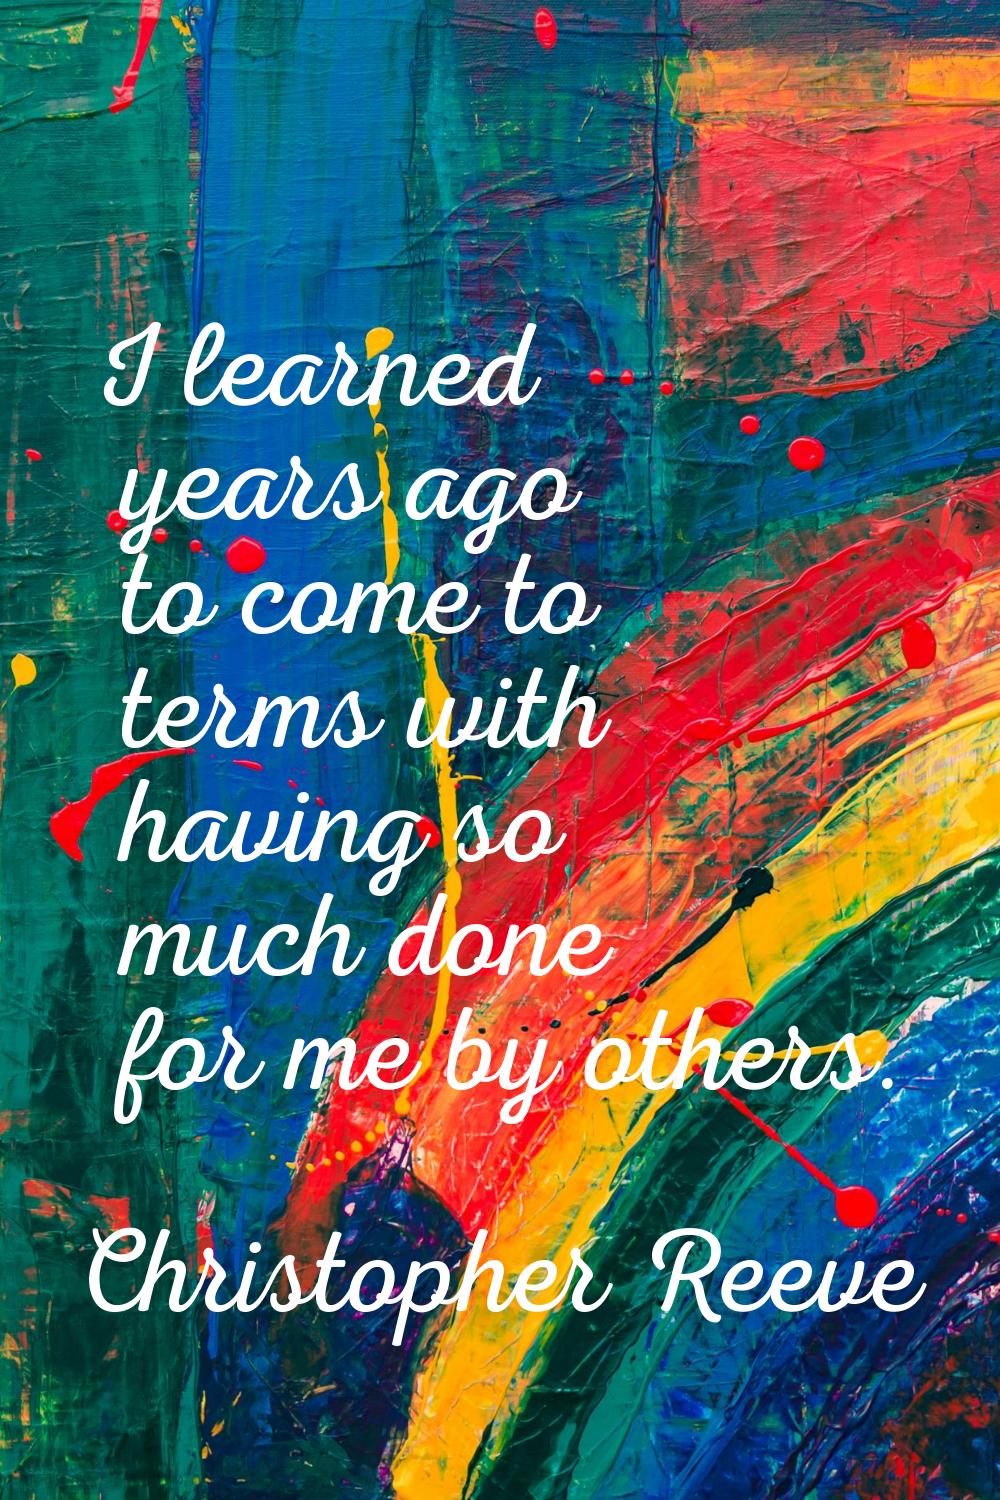 I learned years ago to come to terms with having so much done for me by others.